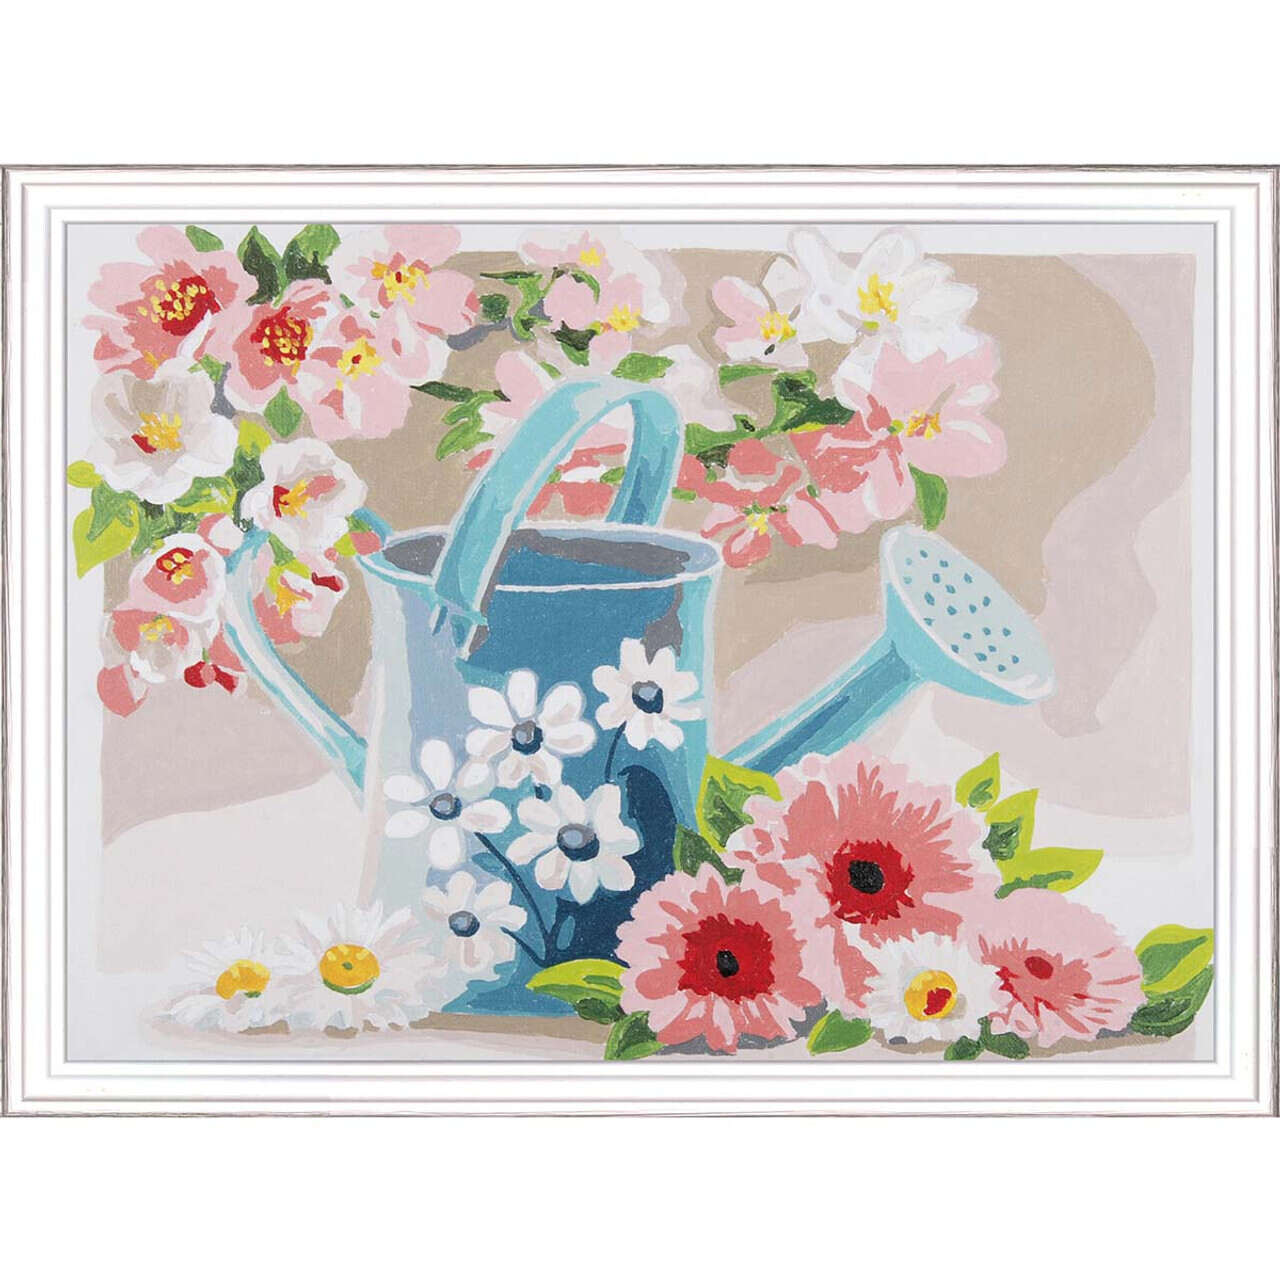 Vervaco Paint by Number Kit 16X12-Watering Can with Flowers